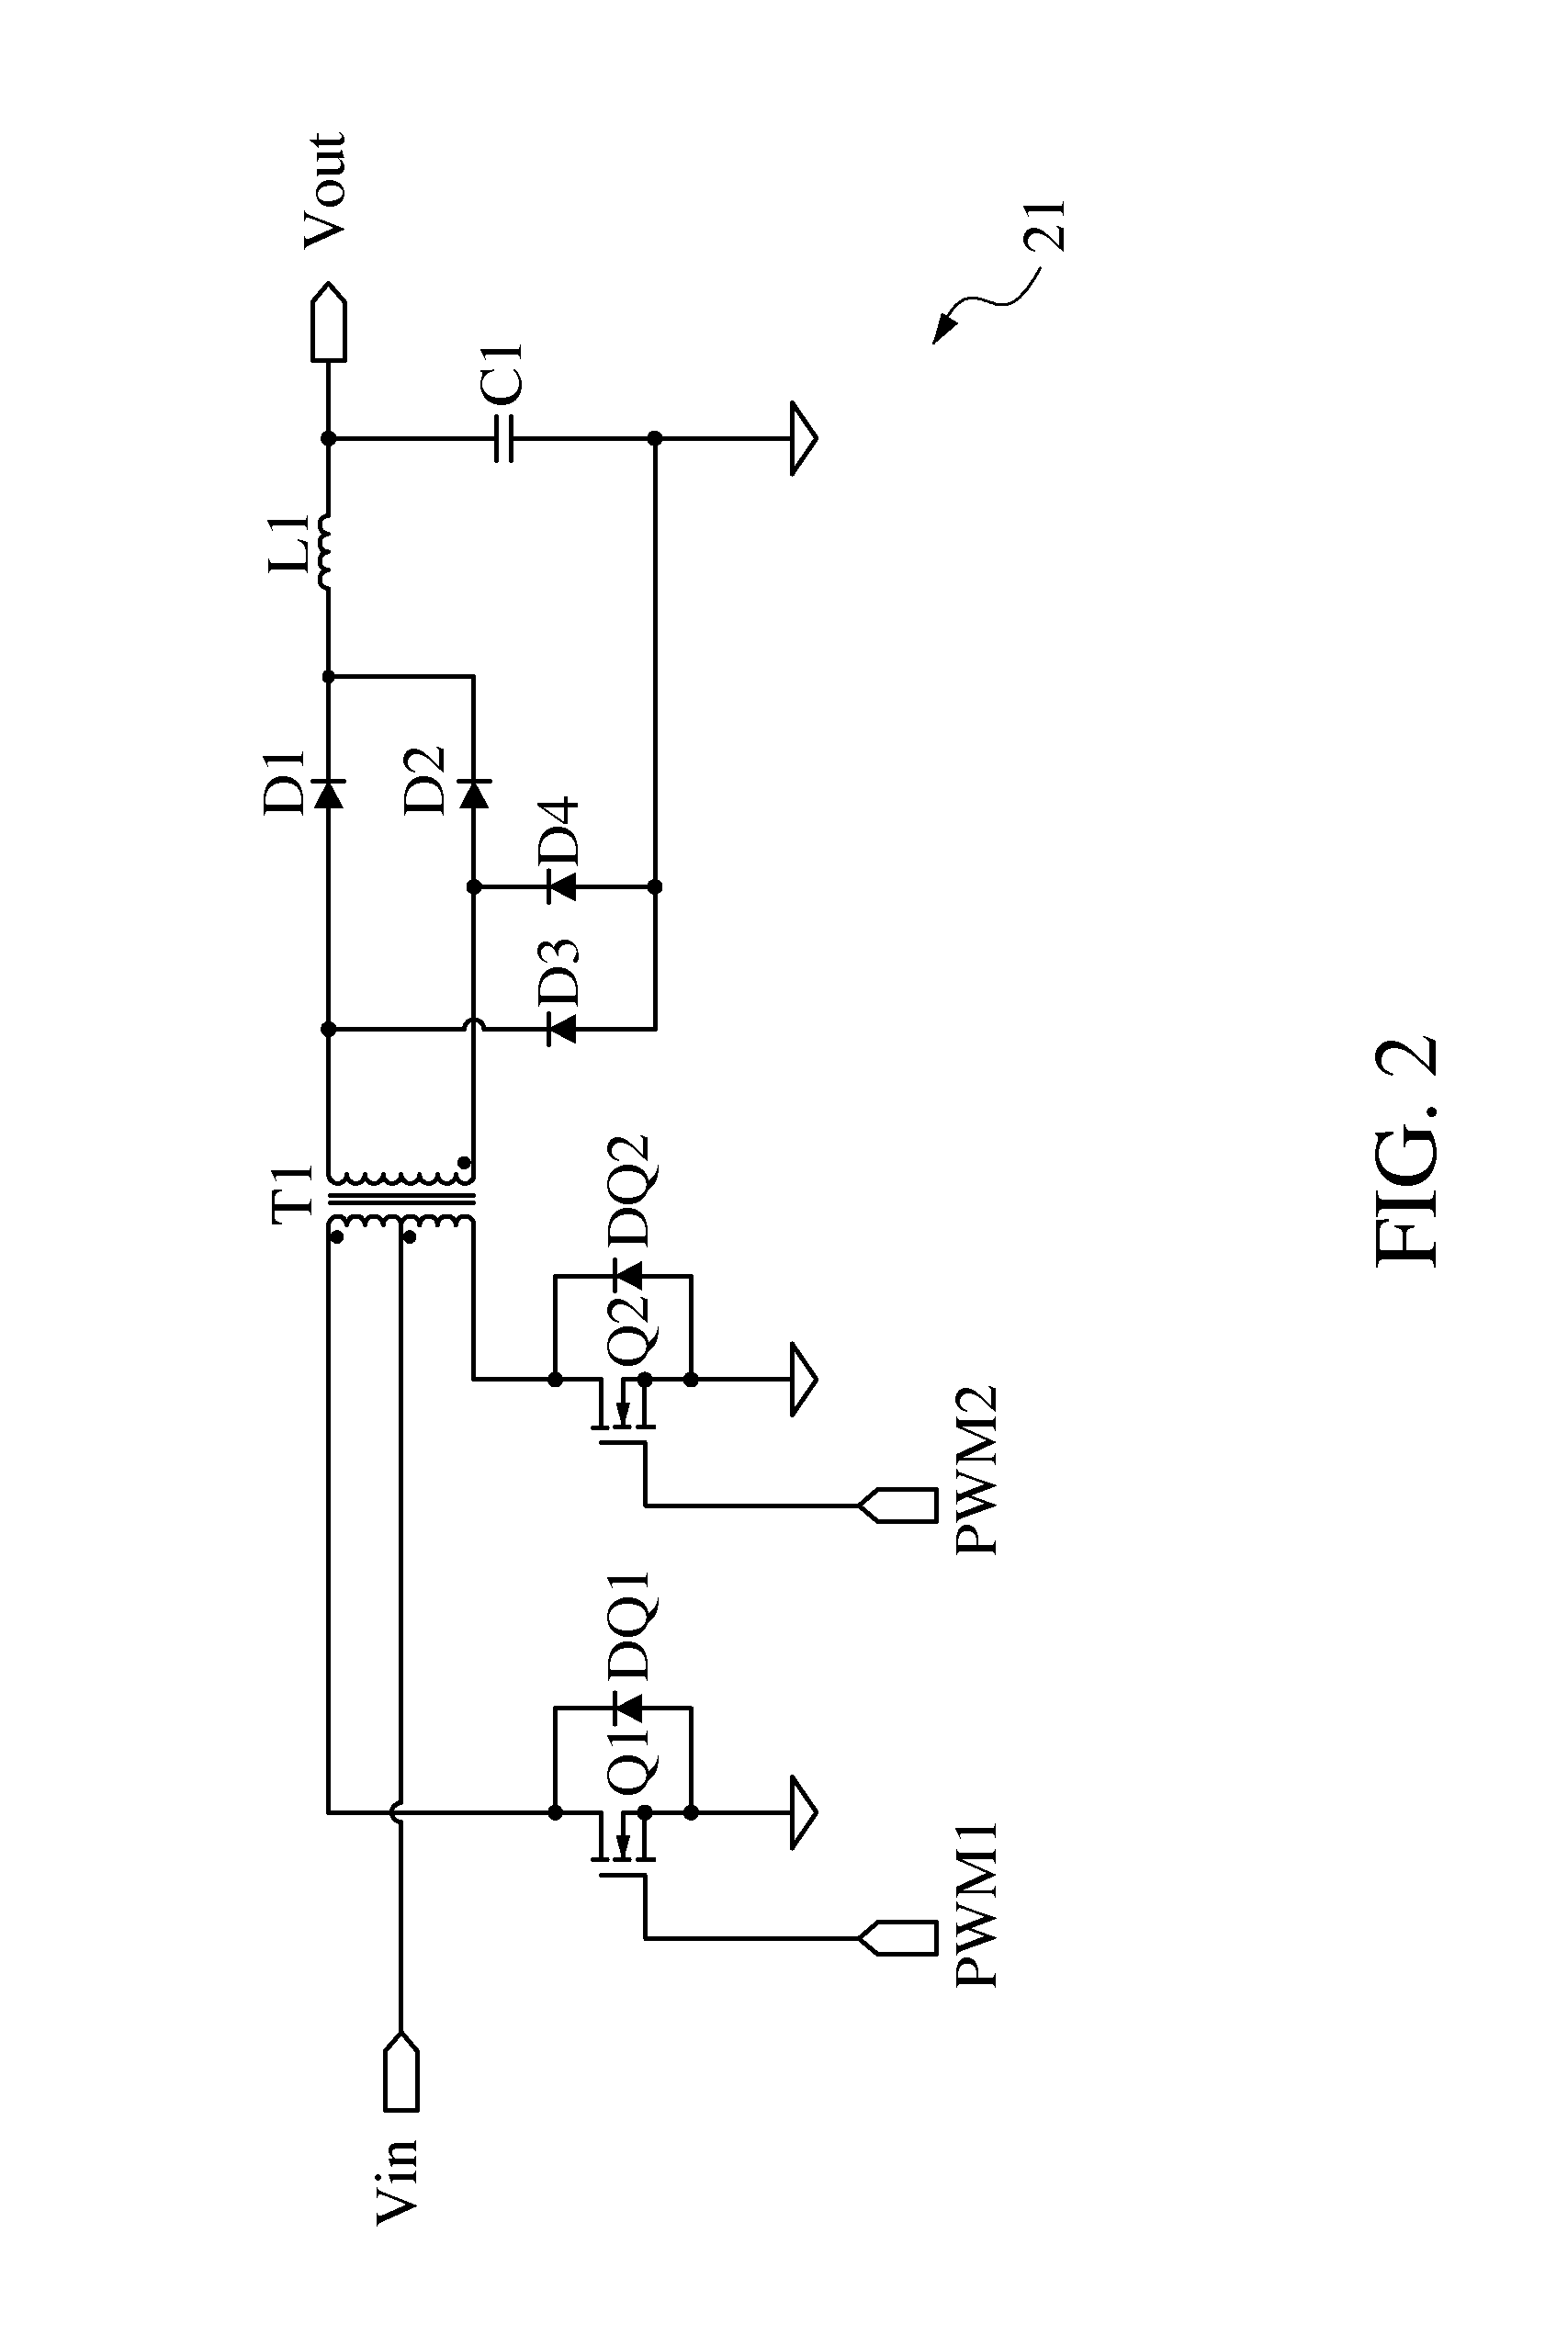 Driving circuit for single-string LED lamp